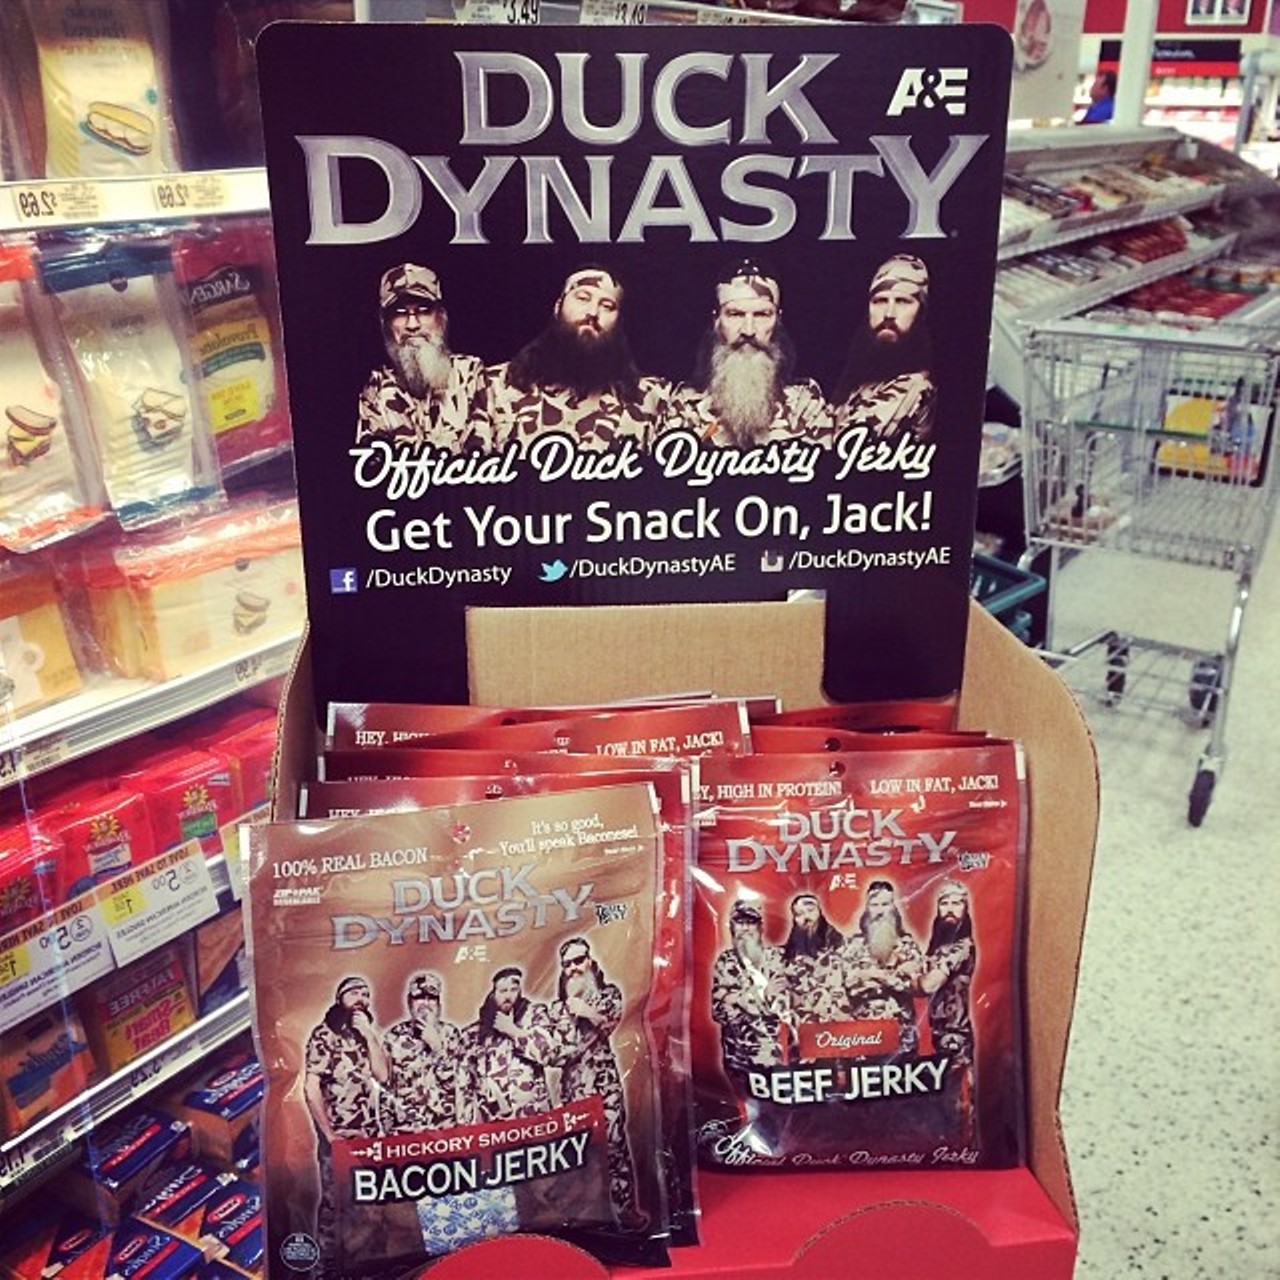 Duck Dynasty display at Publix